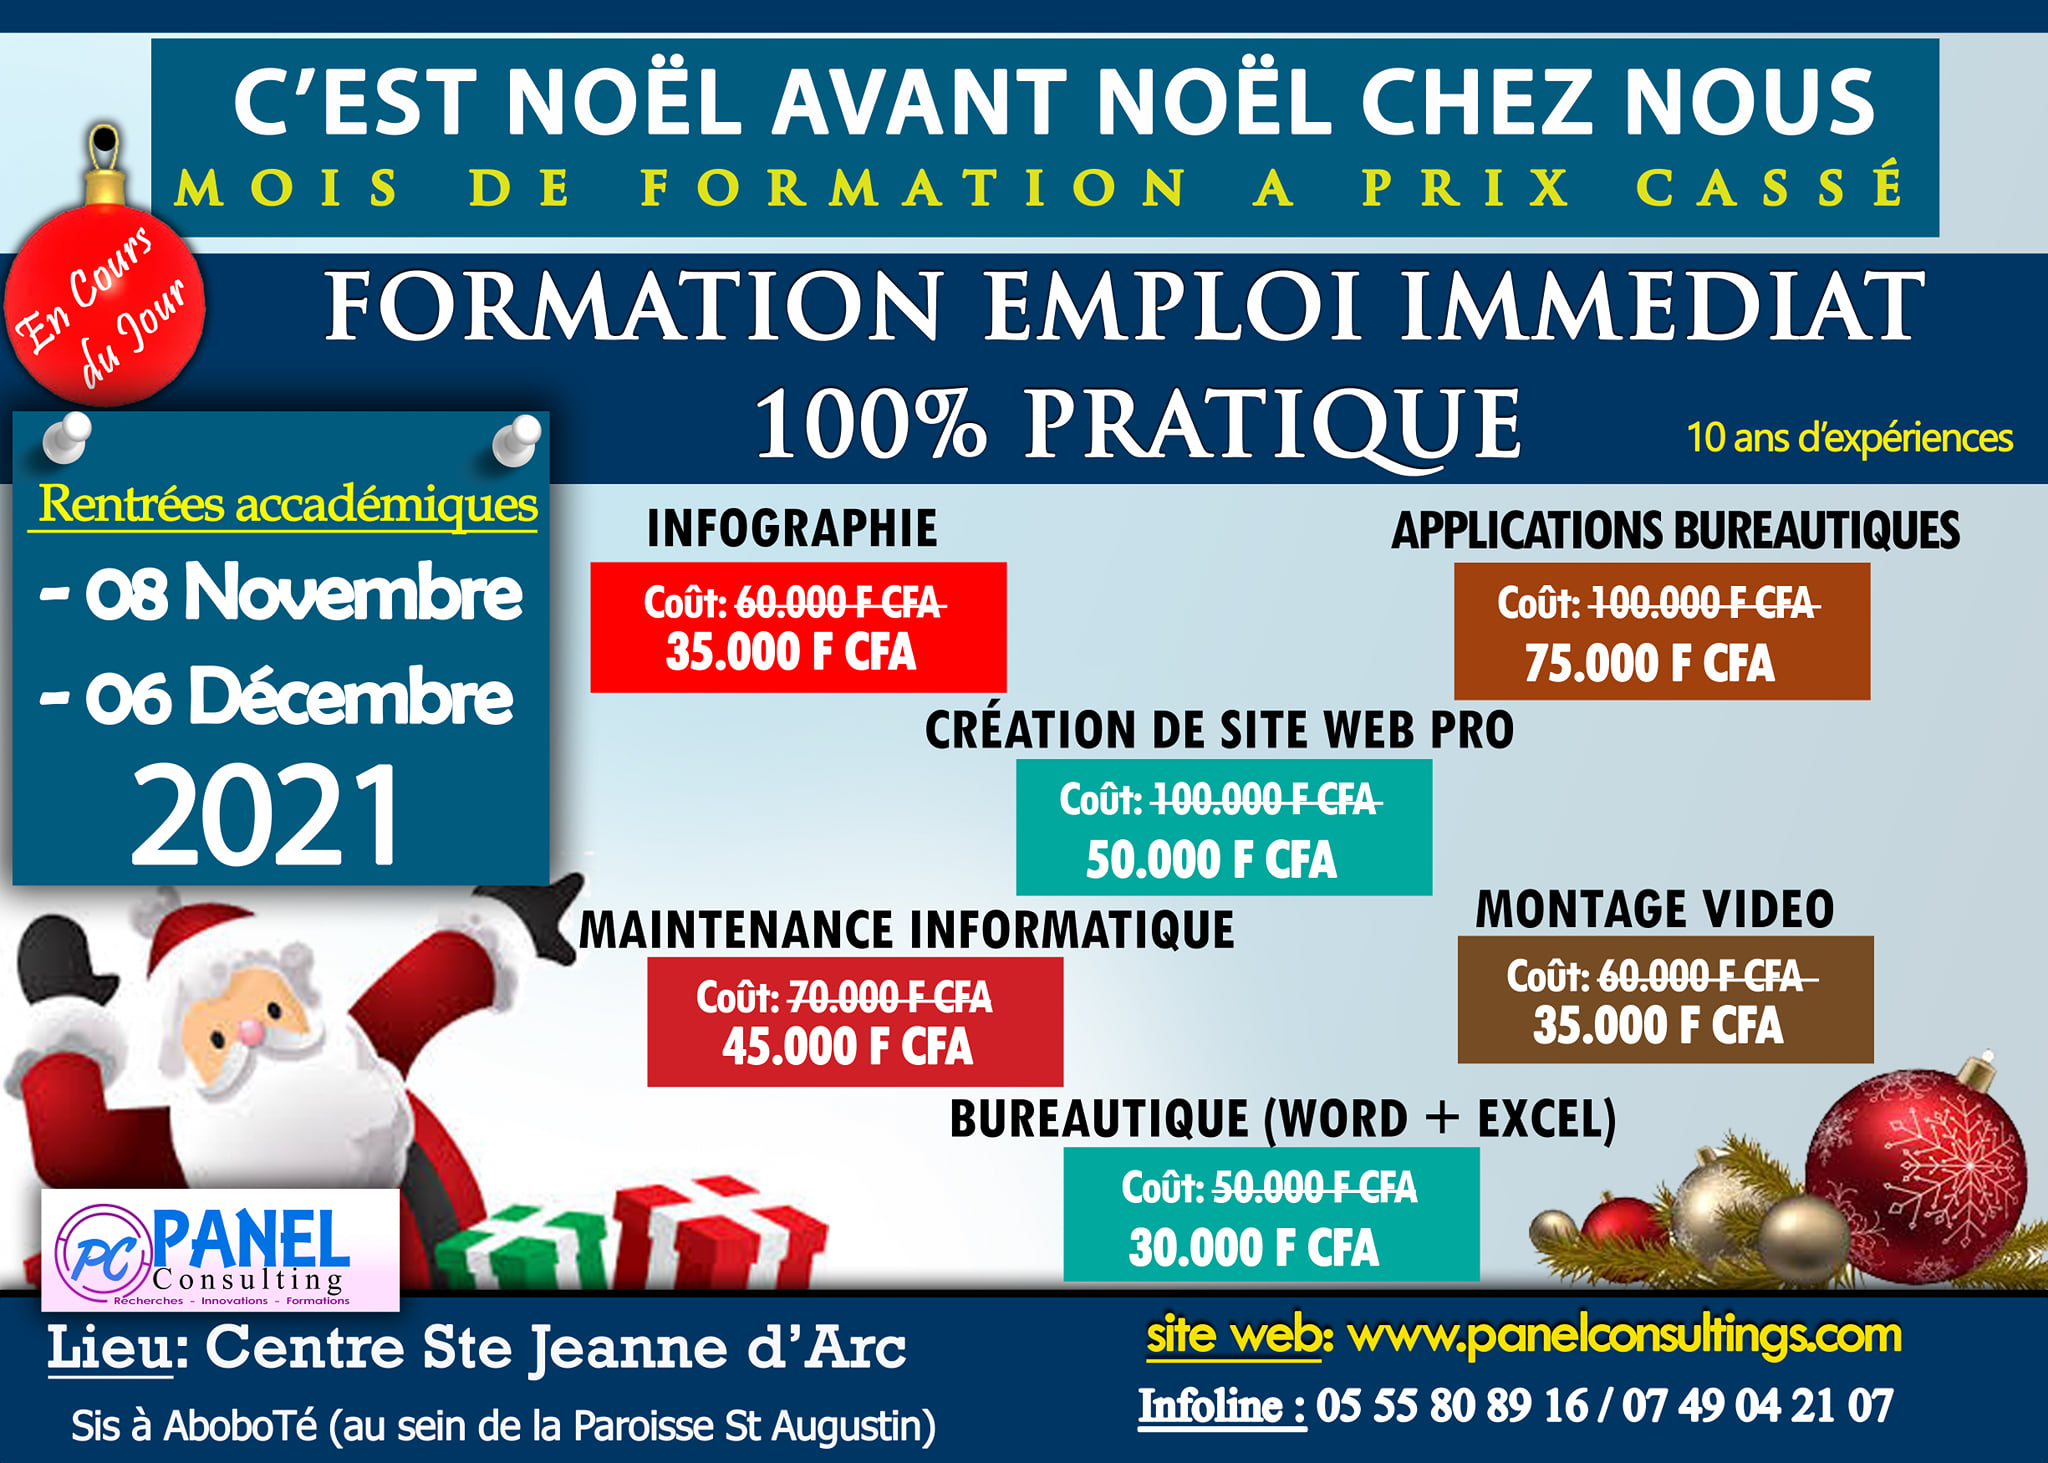 Panel - Consulting - Promotion noel Affiche formation qualifiante 2021-2022 AboboTe-nov-dec - Panel - Consulting - Formation.jpg-panel-consulting